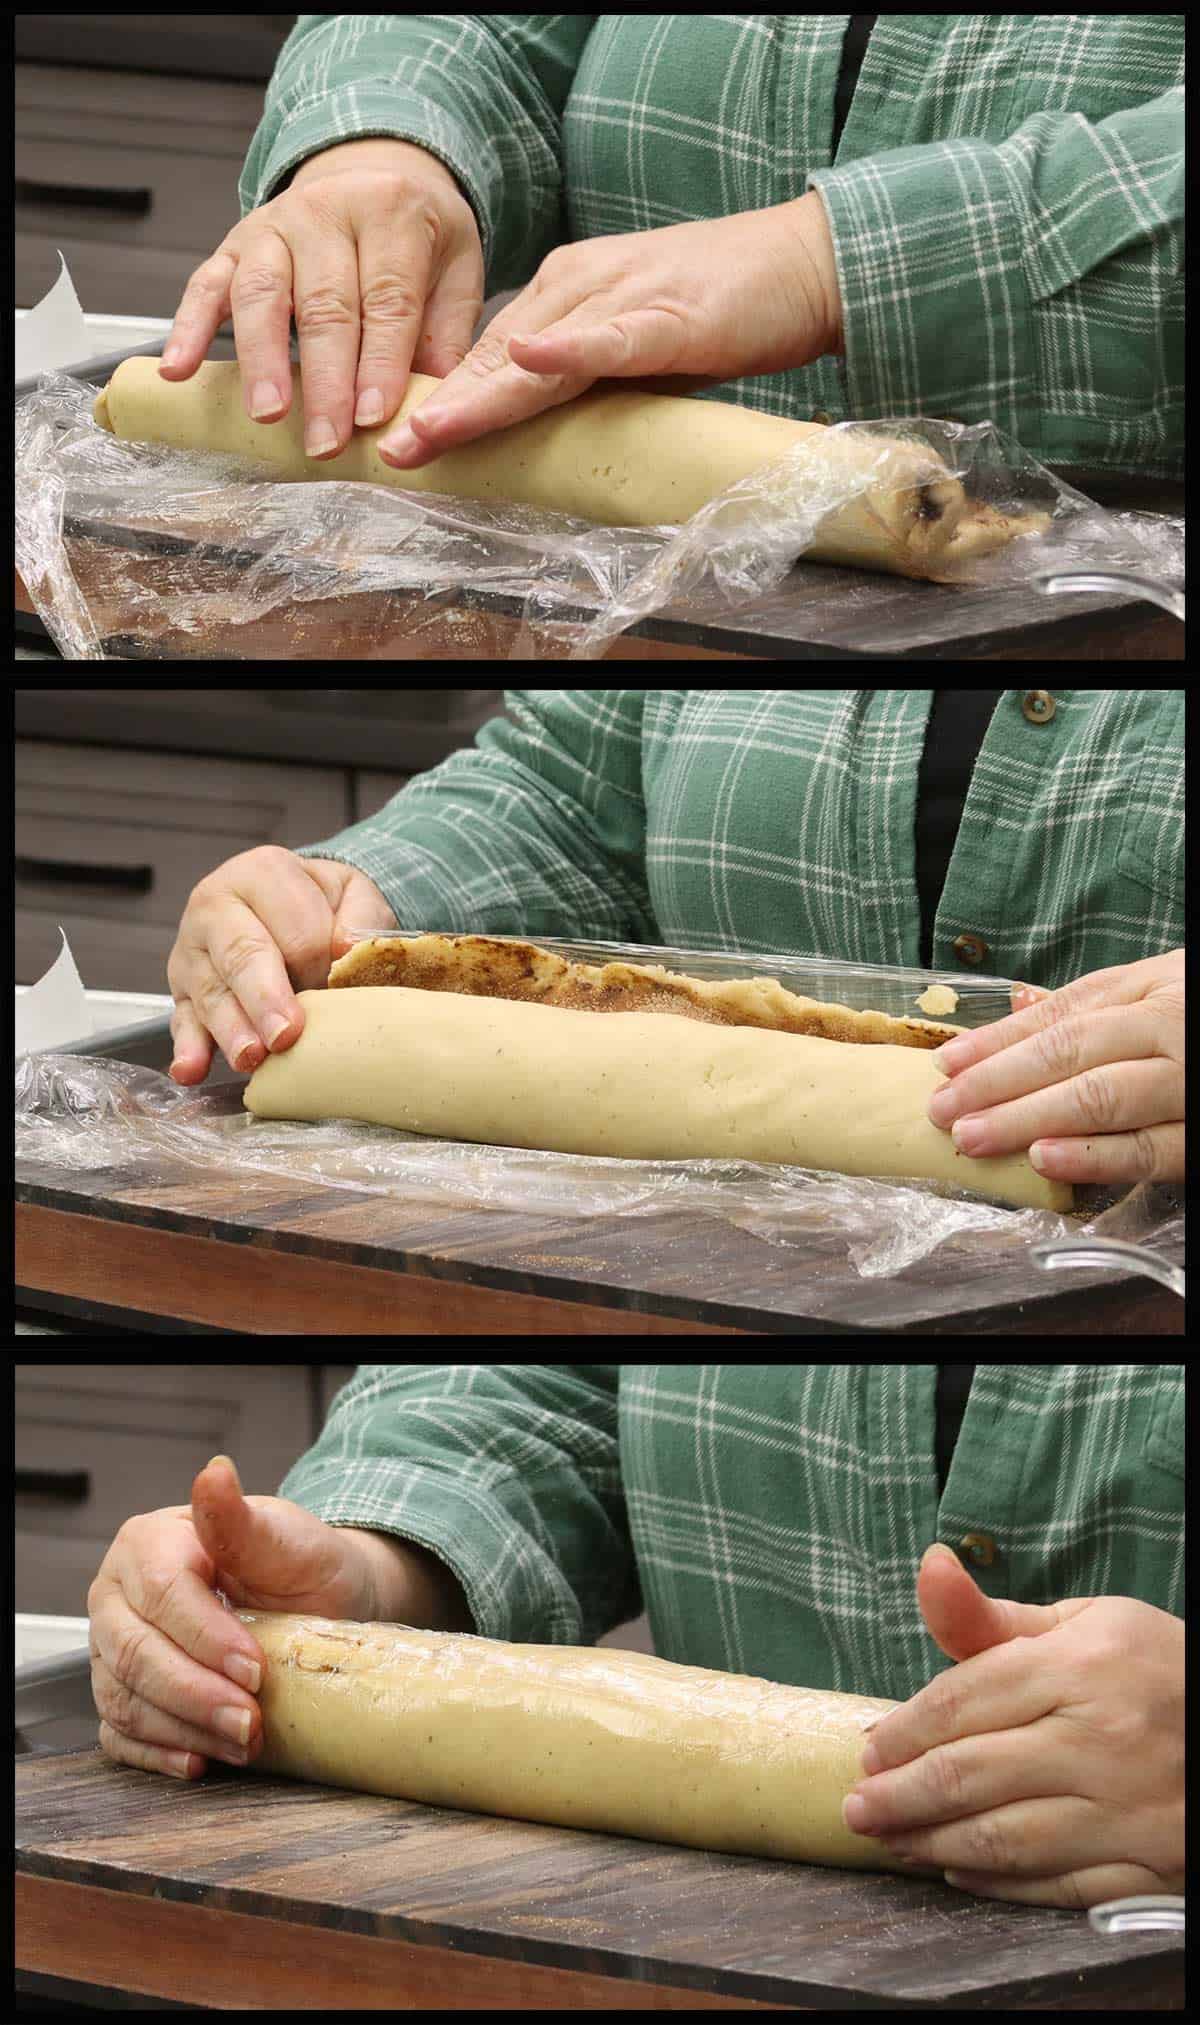 rolling the cookie dough with cinnamon sugar filling into a tight log.